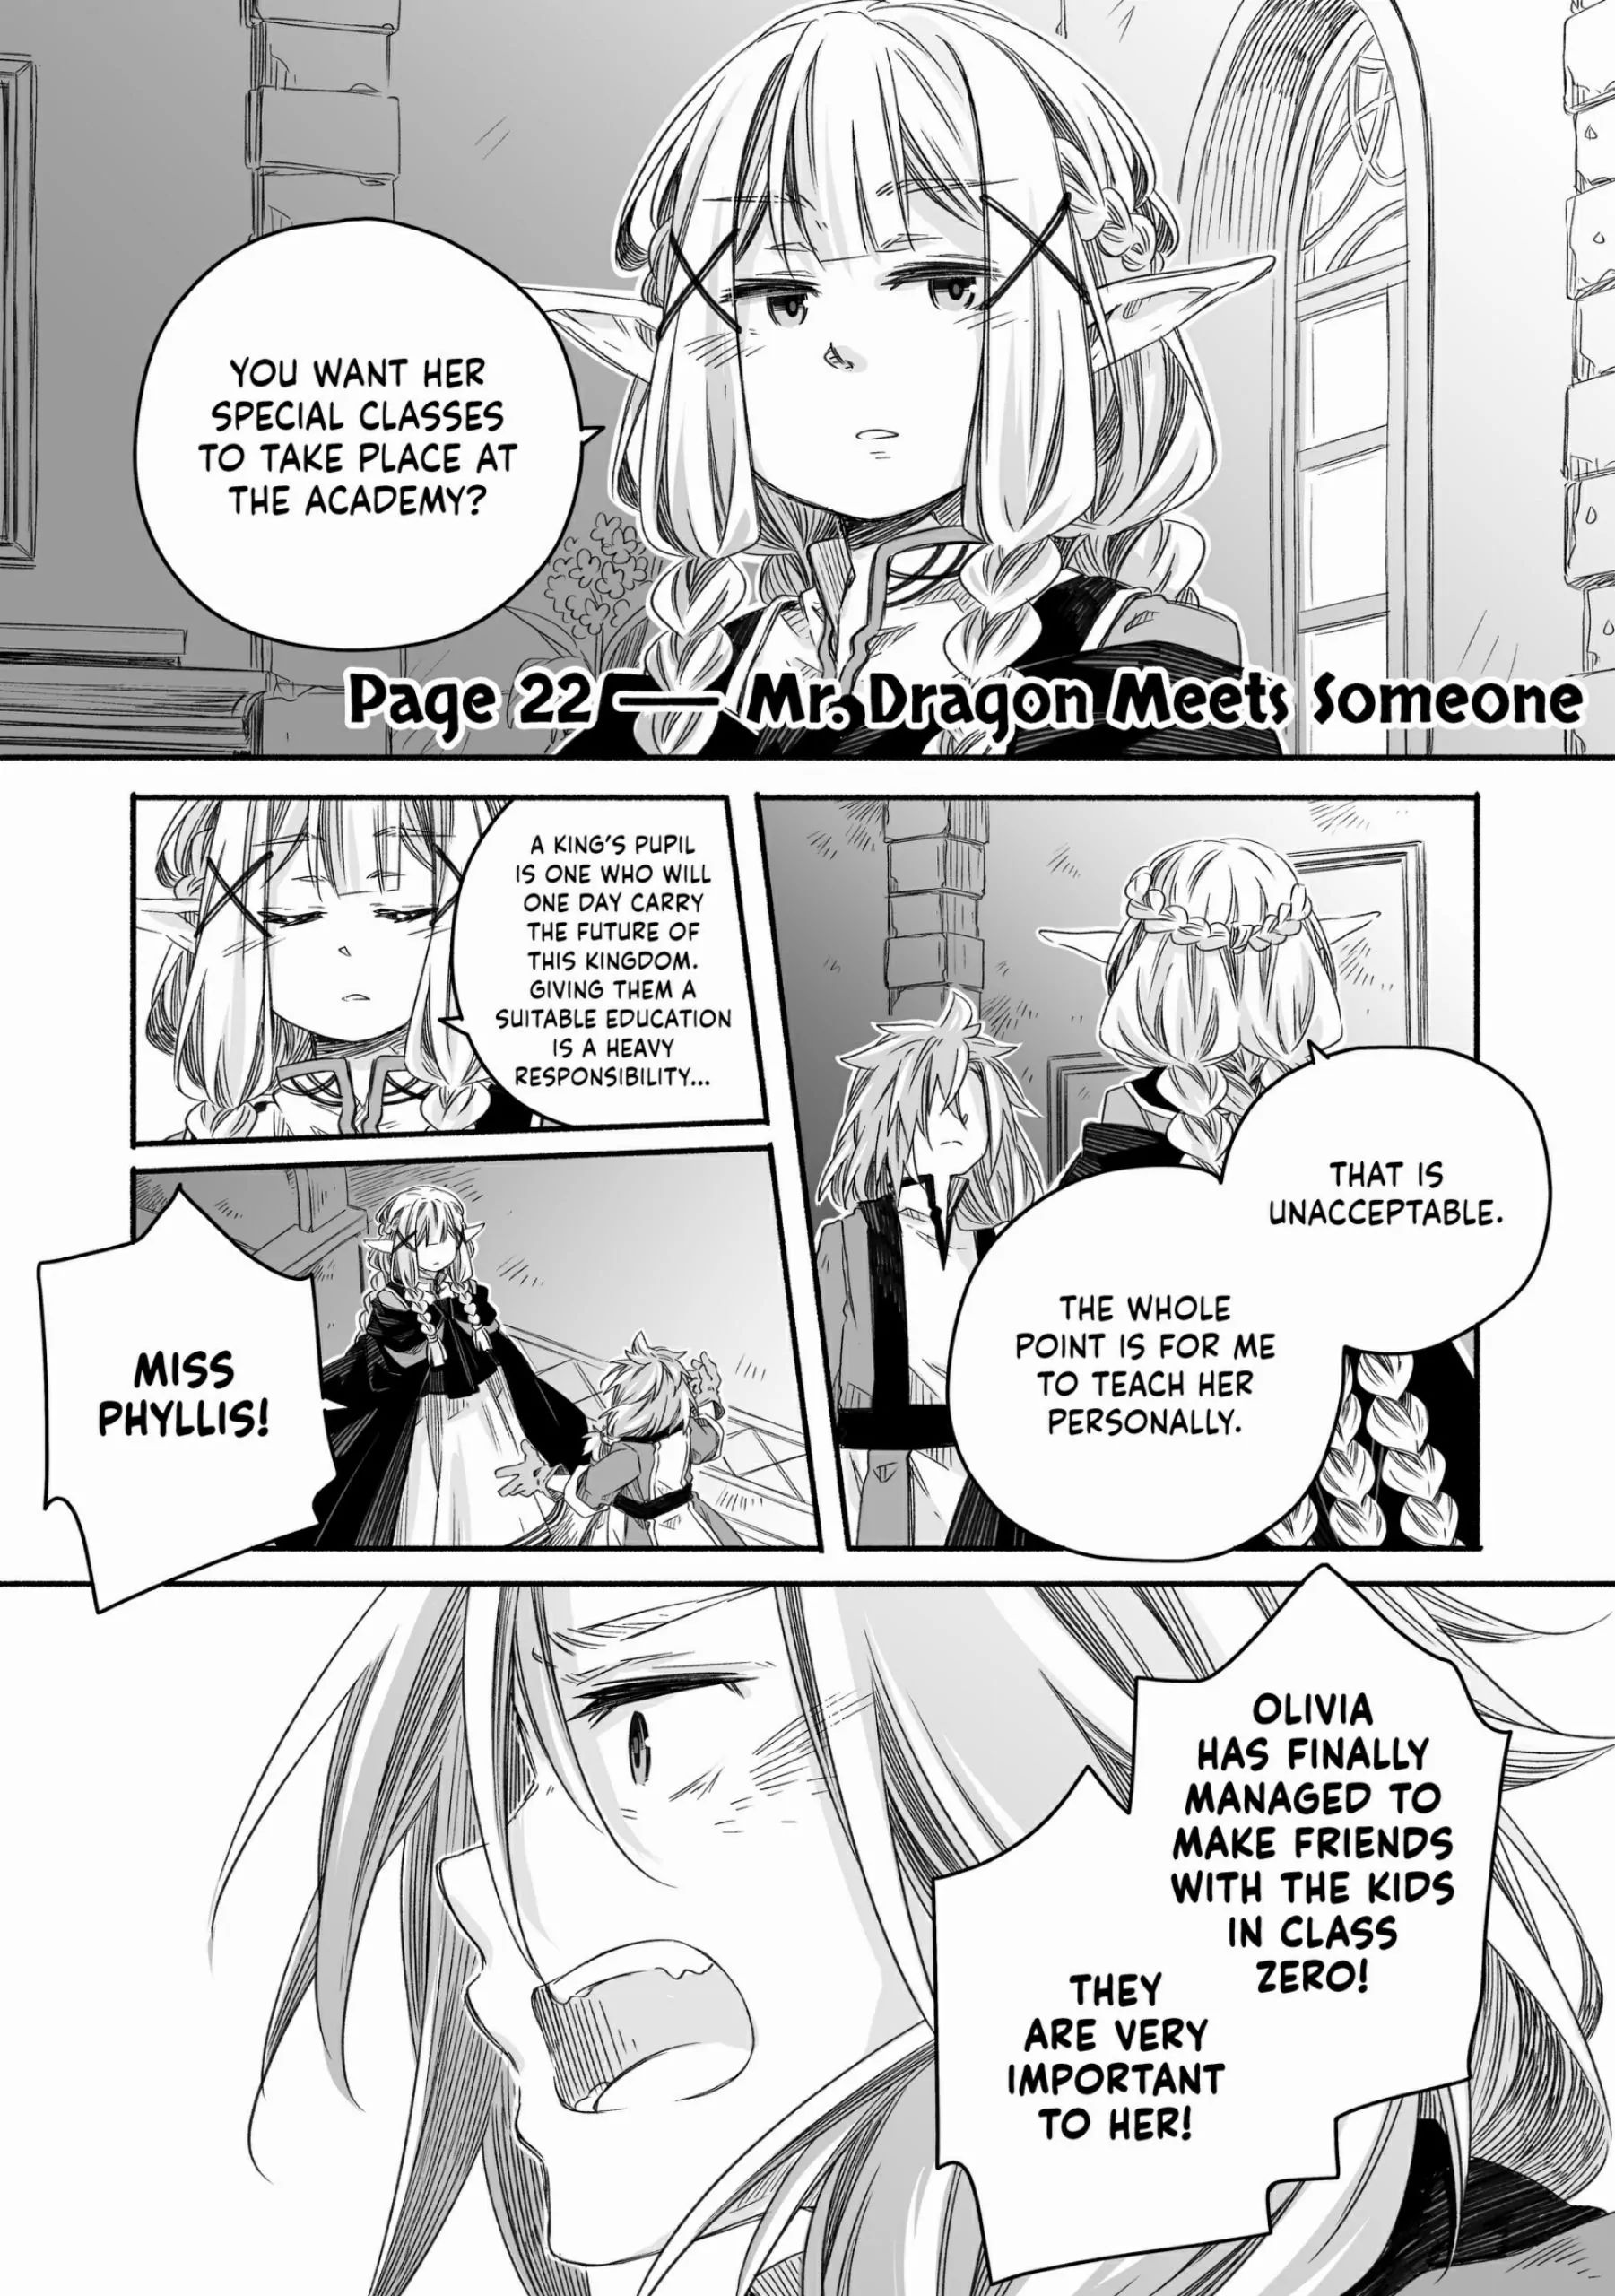 Parenting Diary Of The Strongest Dragon Who Suddenly Became A Dad ～ Cute Daughter, Heartwarming And Growing Up To Be The Strongest In The Human World ～ - chapter 22 - #1